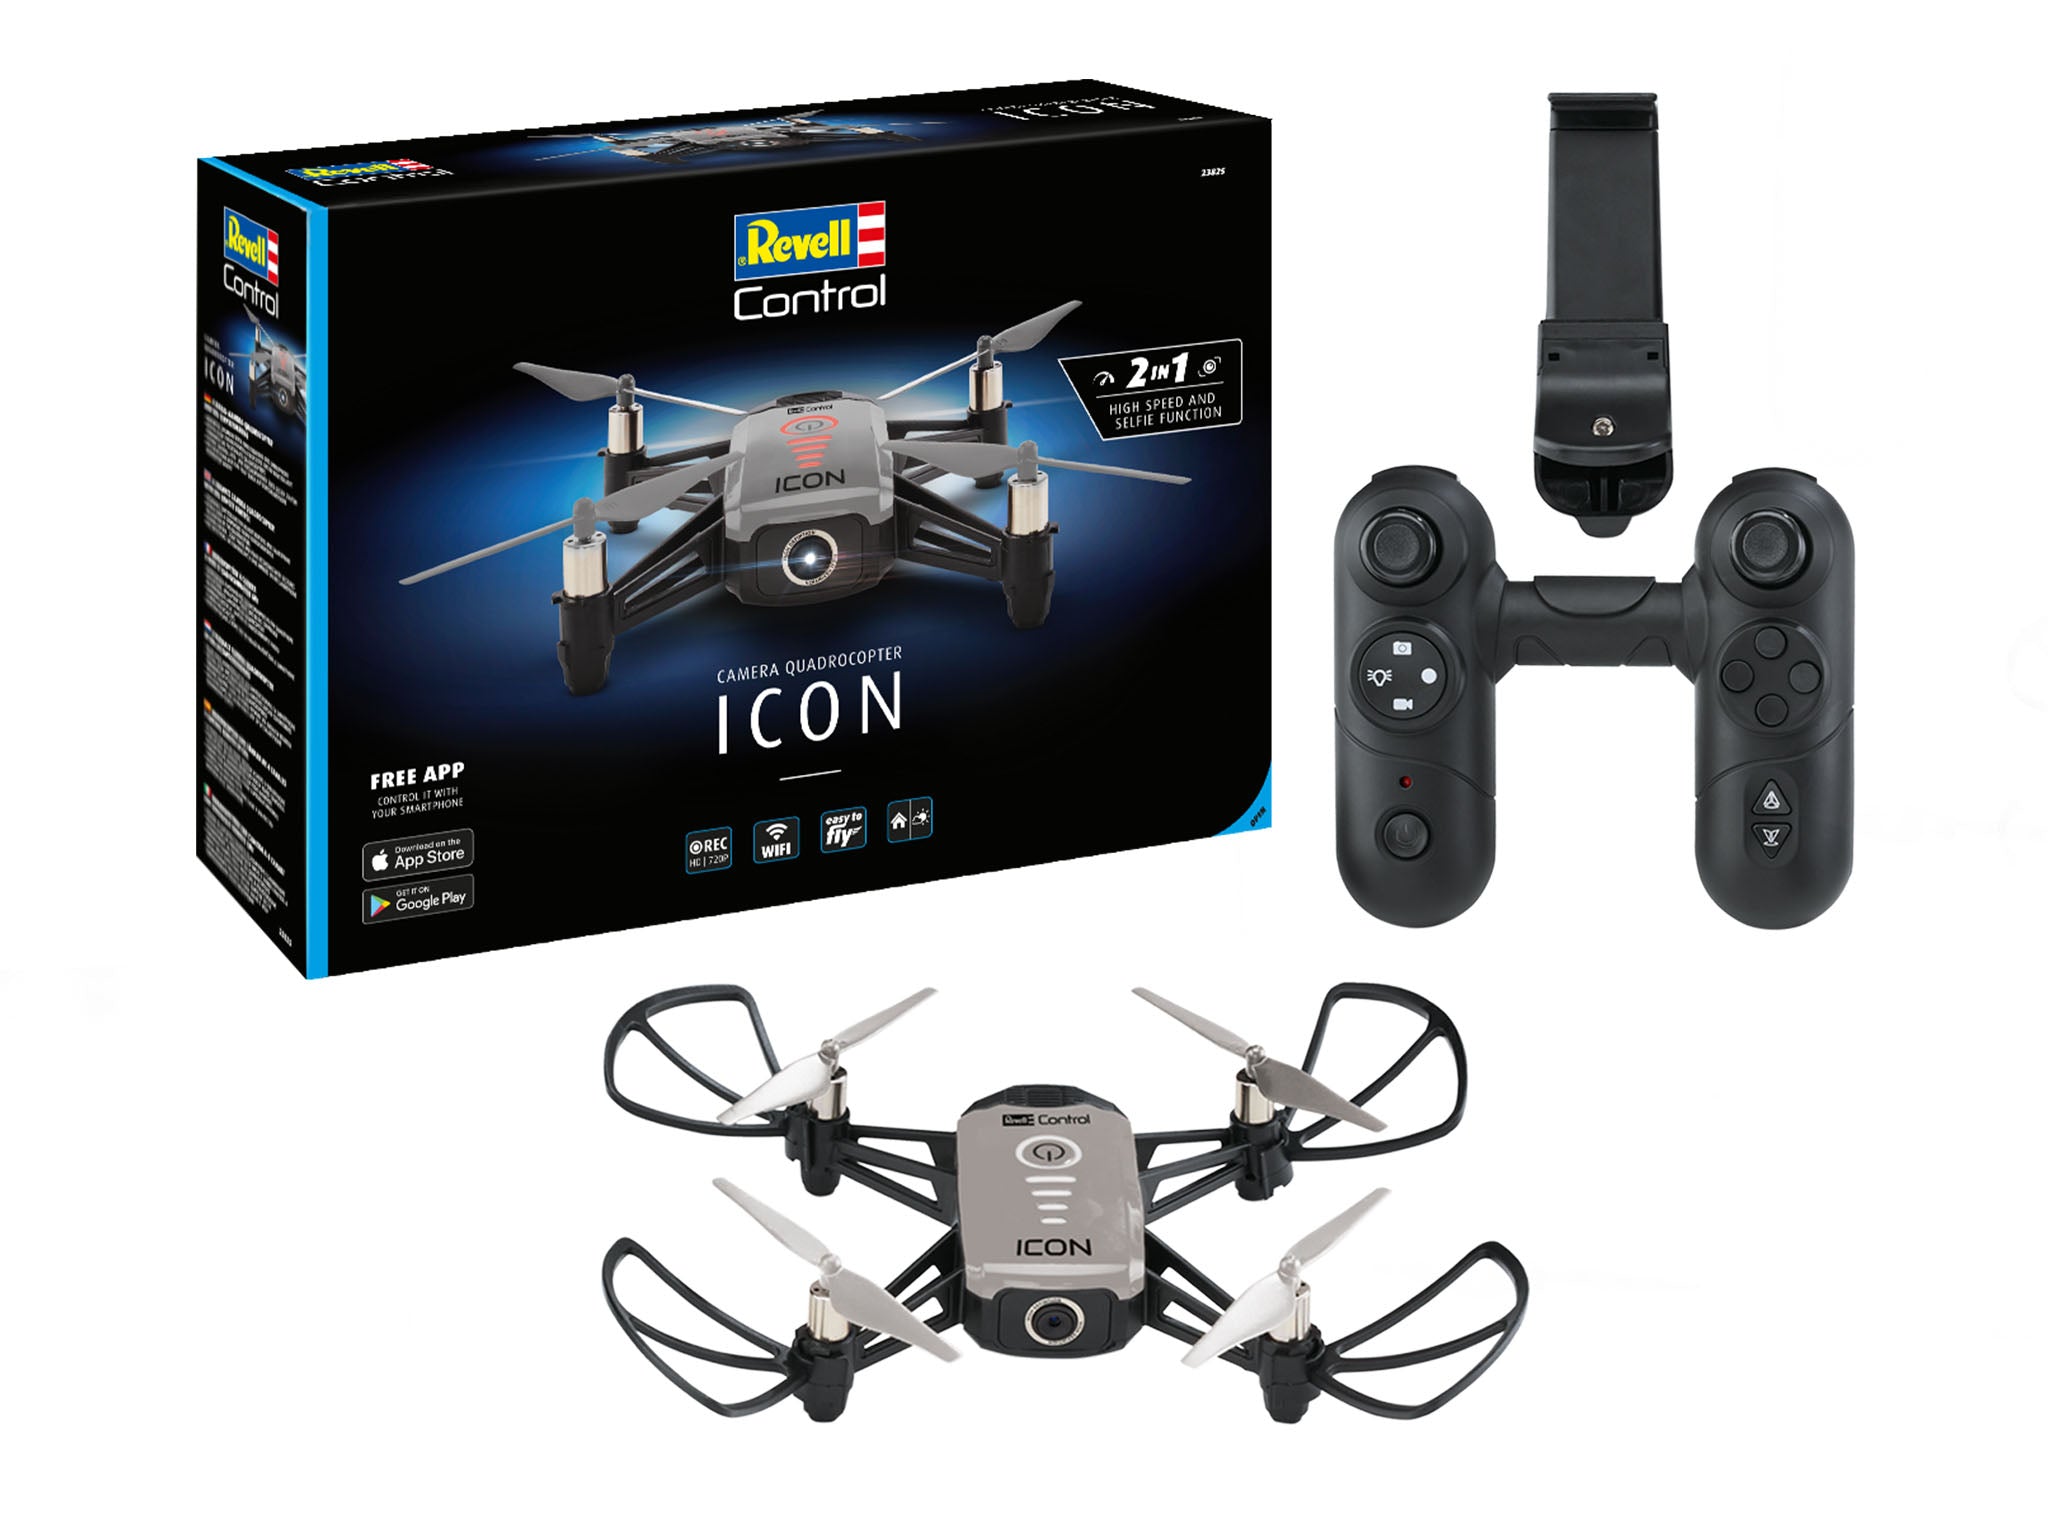 Radio Control Helicopter Revell RC Camera Quadrocopter Icon